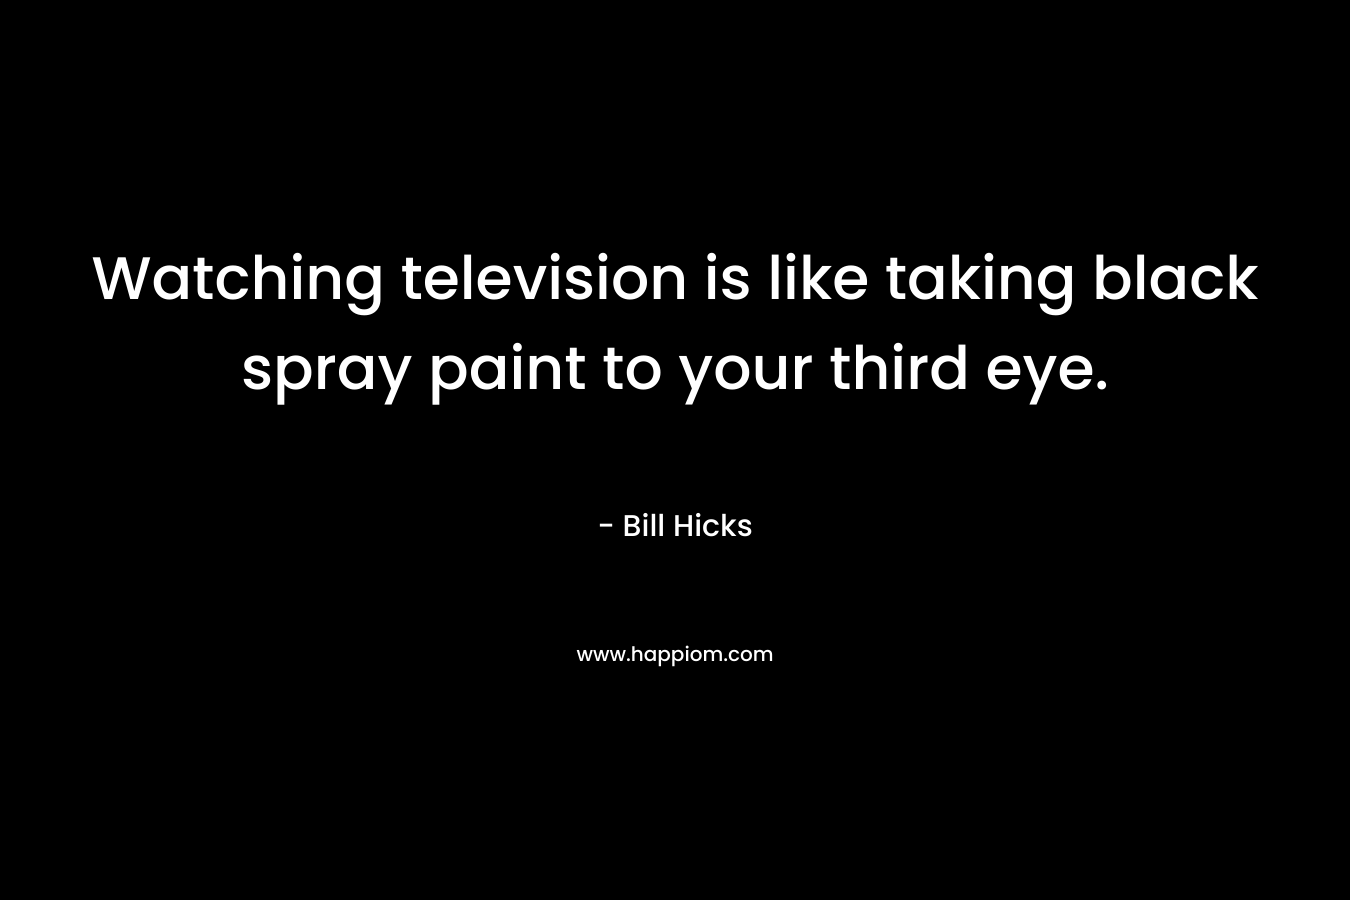 Watching television is like taking black spray paint to your third eye. – Bill Hicks